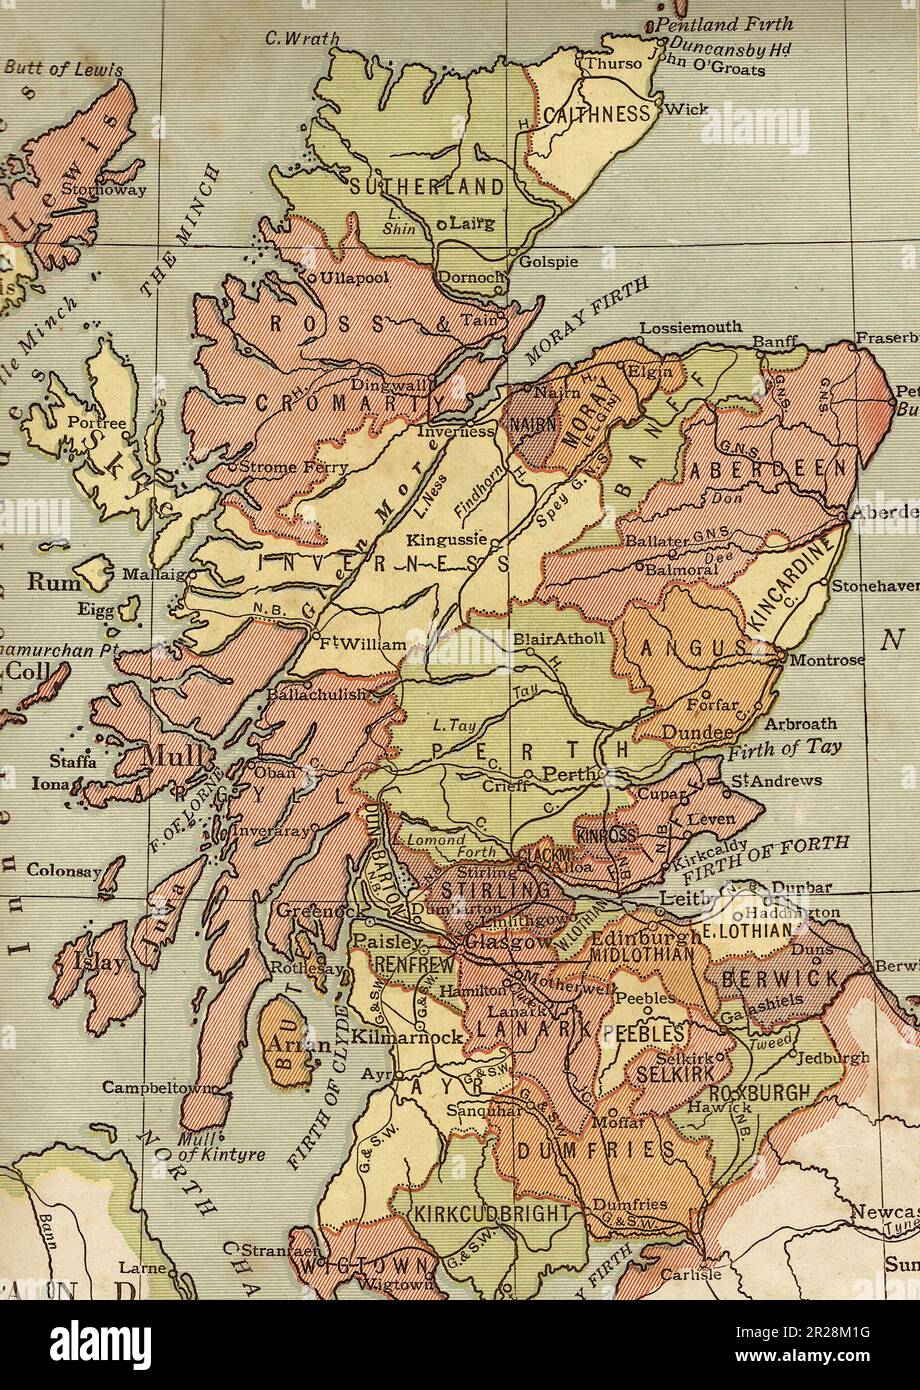 Vintage political map of Scotland in sepia. Stock Photo